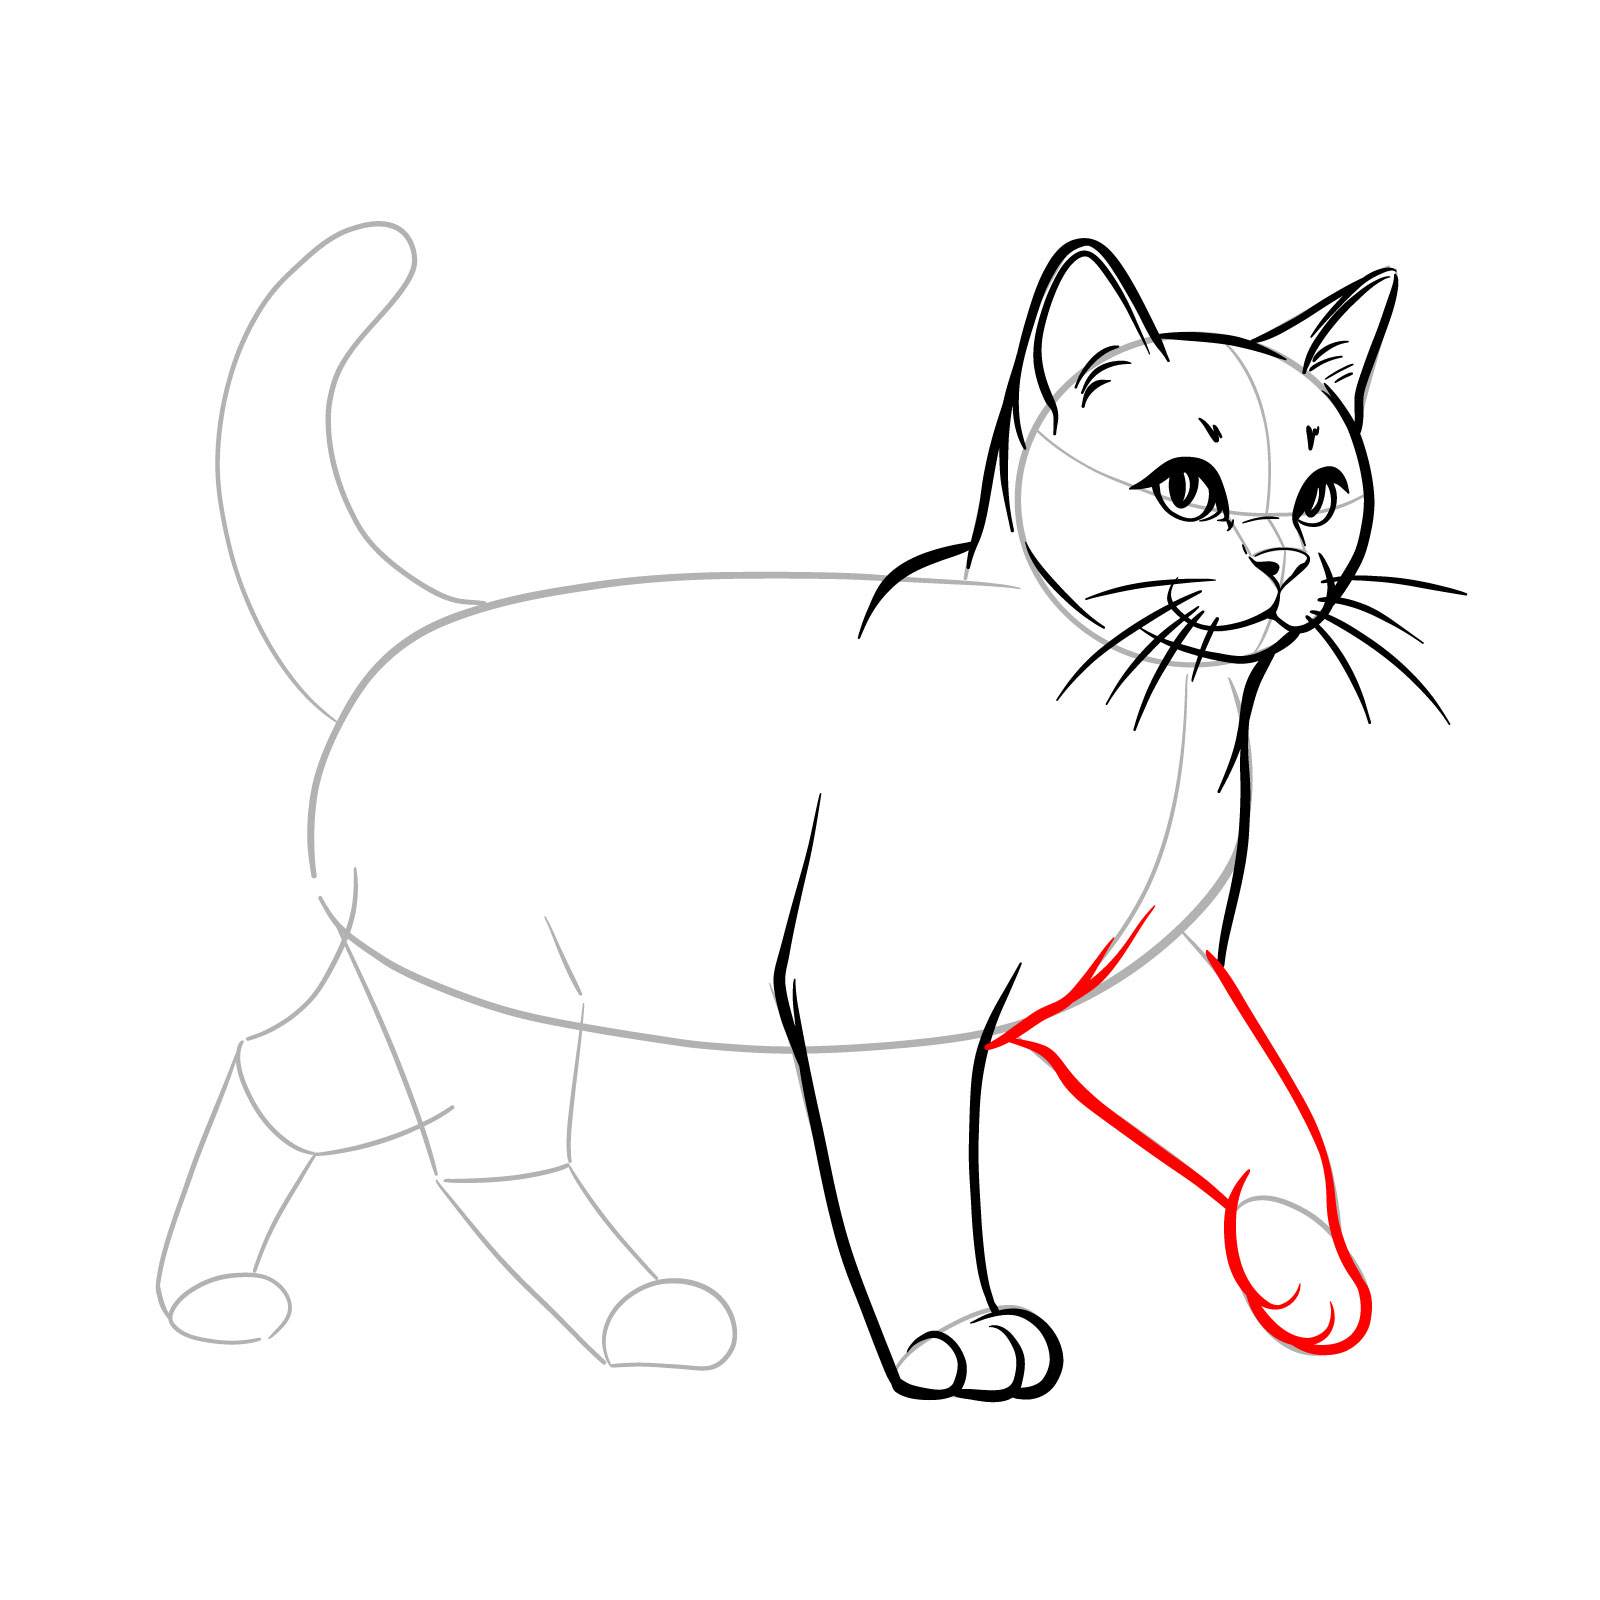 Sketching the forward-thrusting front leg of the walking cat - step 10